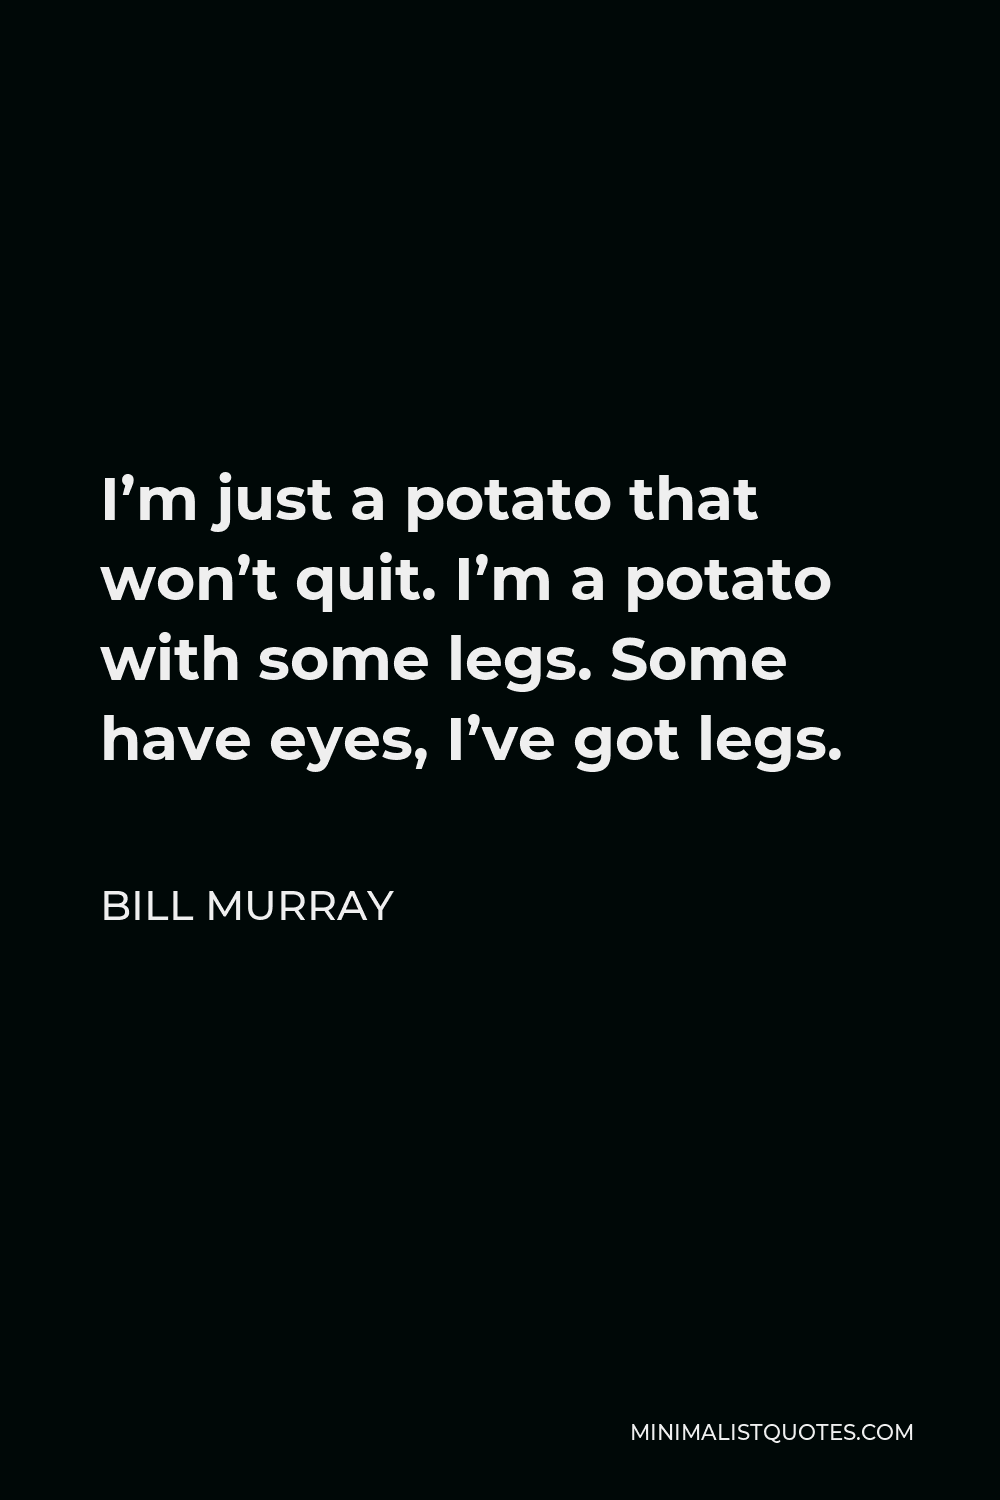 Bill Murray Quote - I’m just a potato that won’t quit. I’m a potato with some legs. Some have eyes, I’ve got legs.